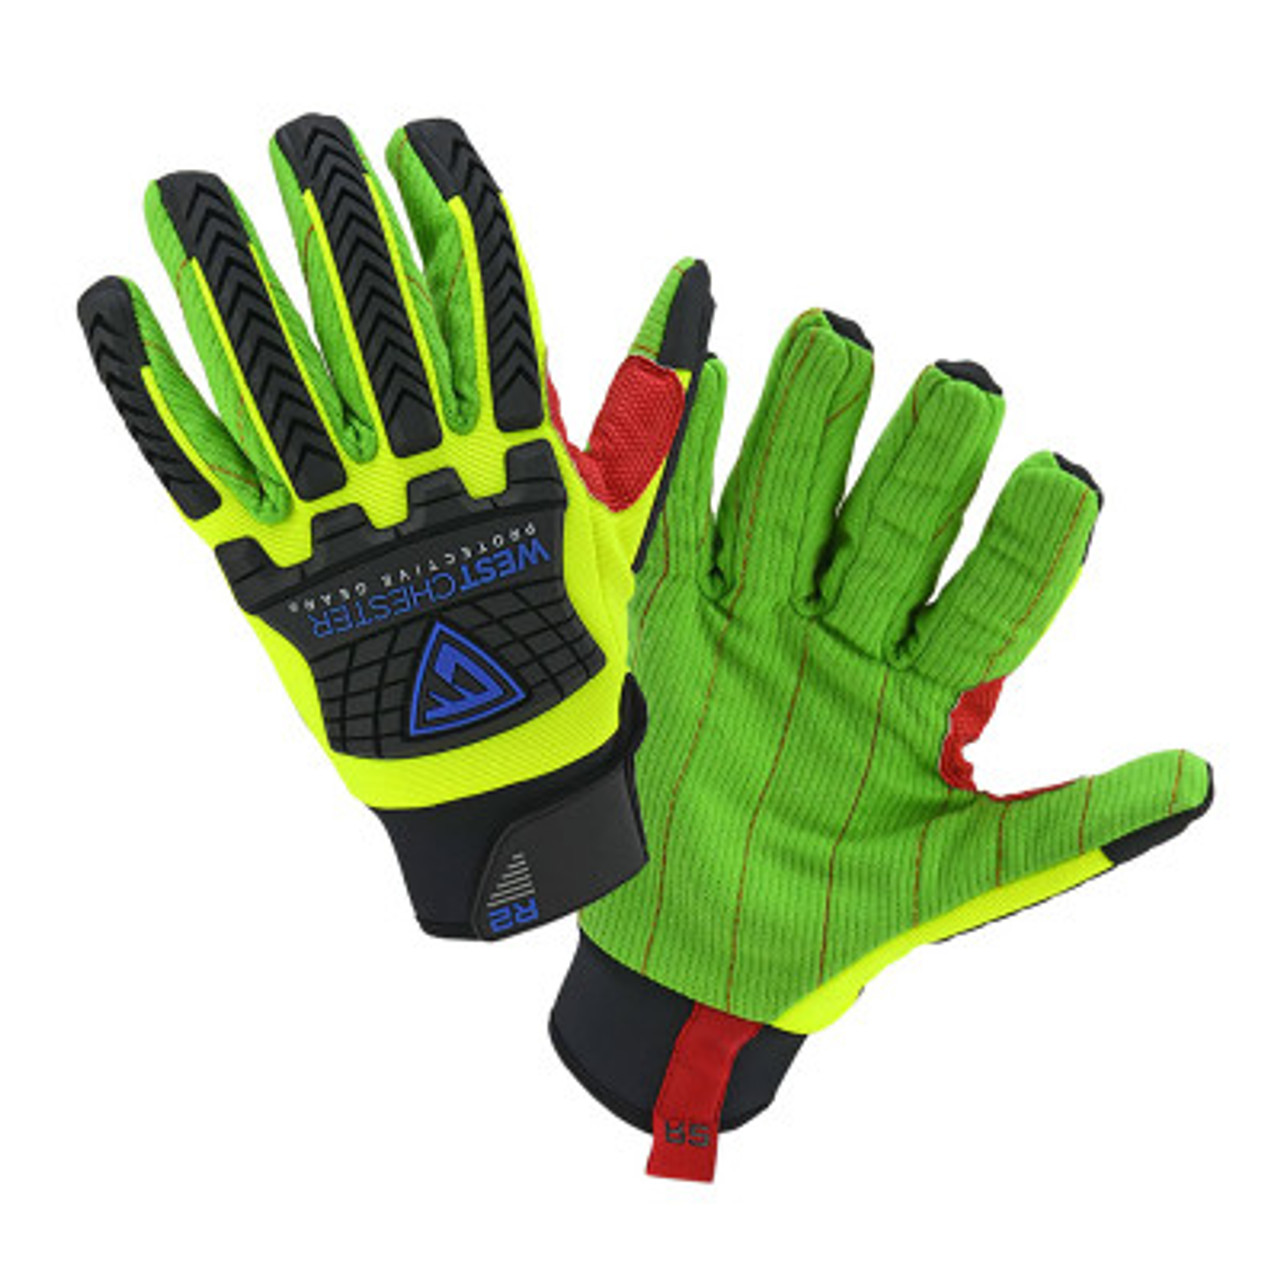 West Chester R2 Green Corded Palm Rigger Glove Cotton Tpr Large Black Green 6 Pk Aft Fasteners